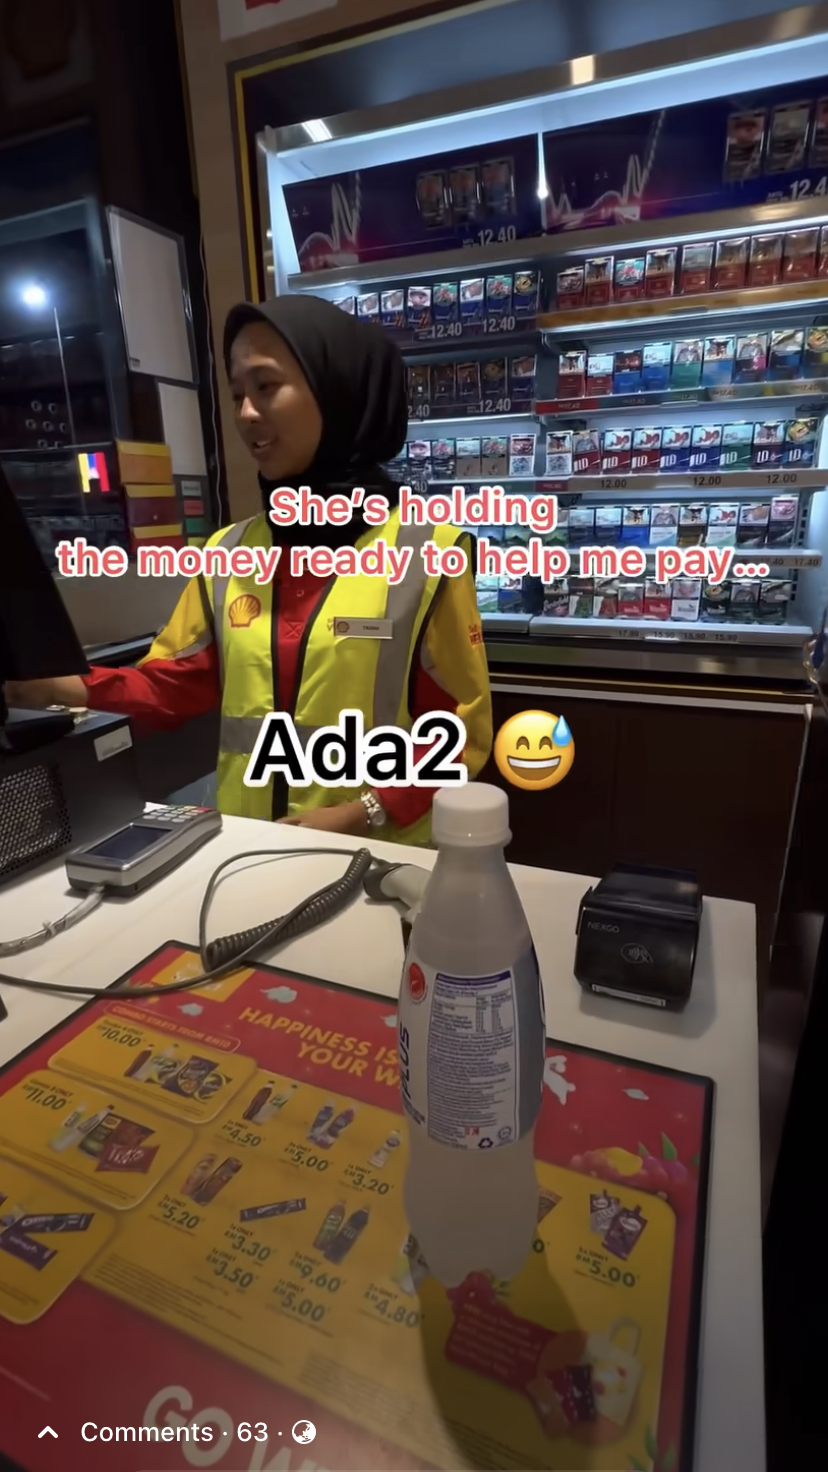 Kind shell cashier offers to pay for customer's drink who had forgotten to bring his wallet